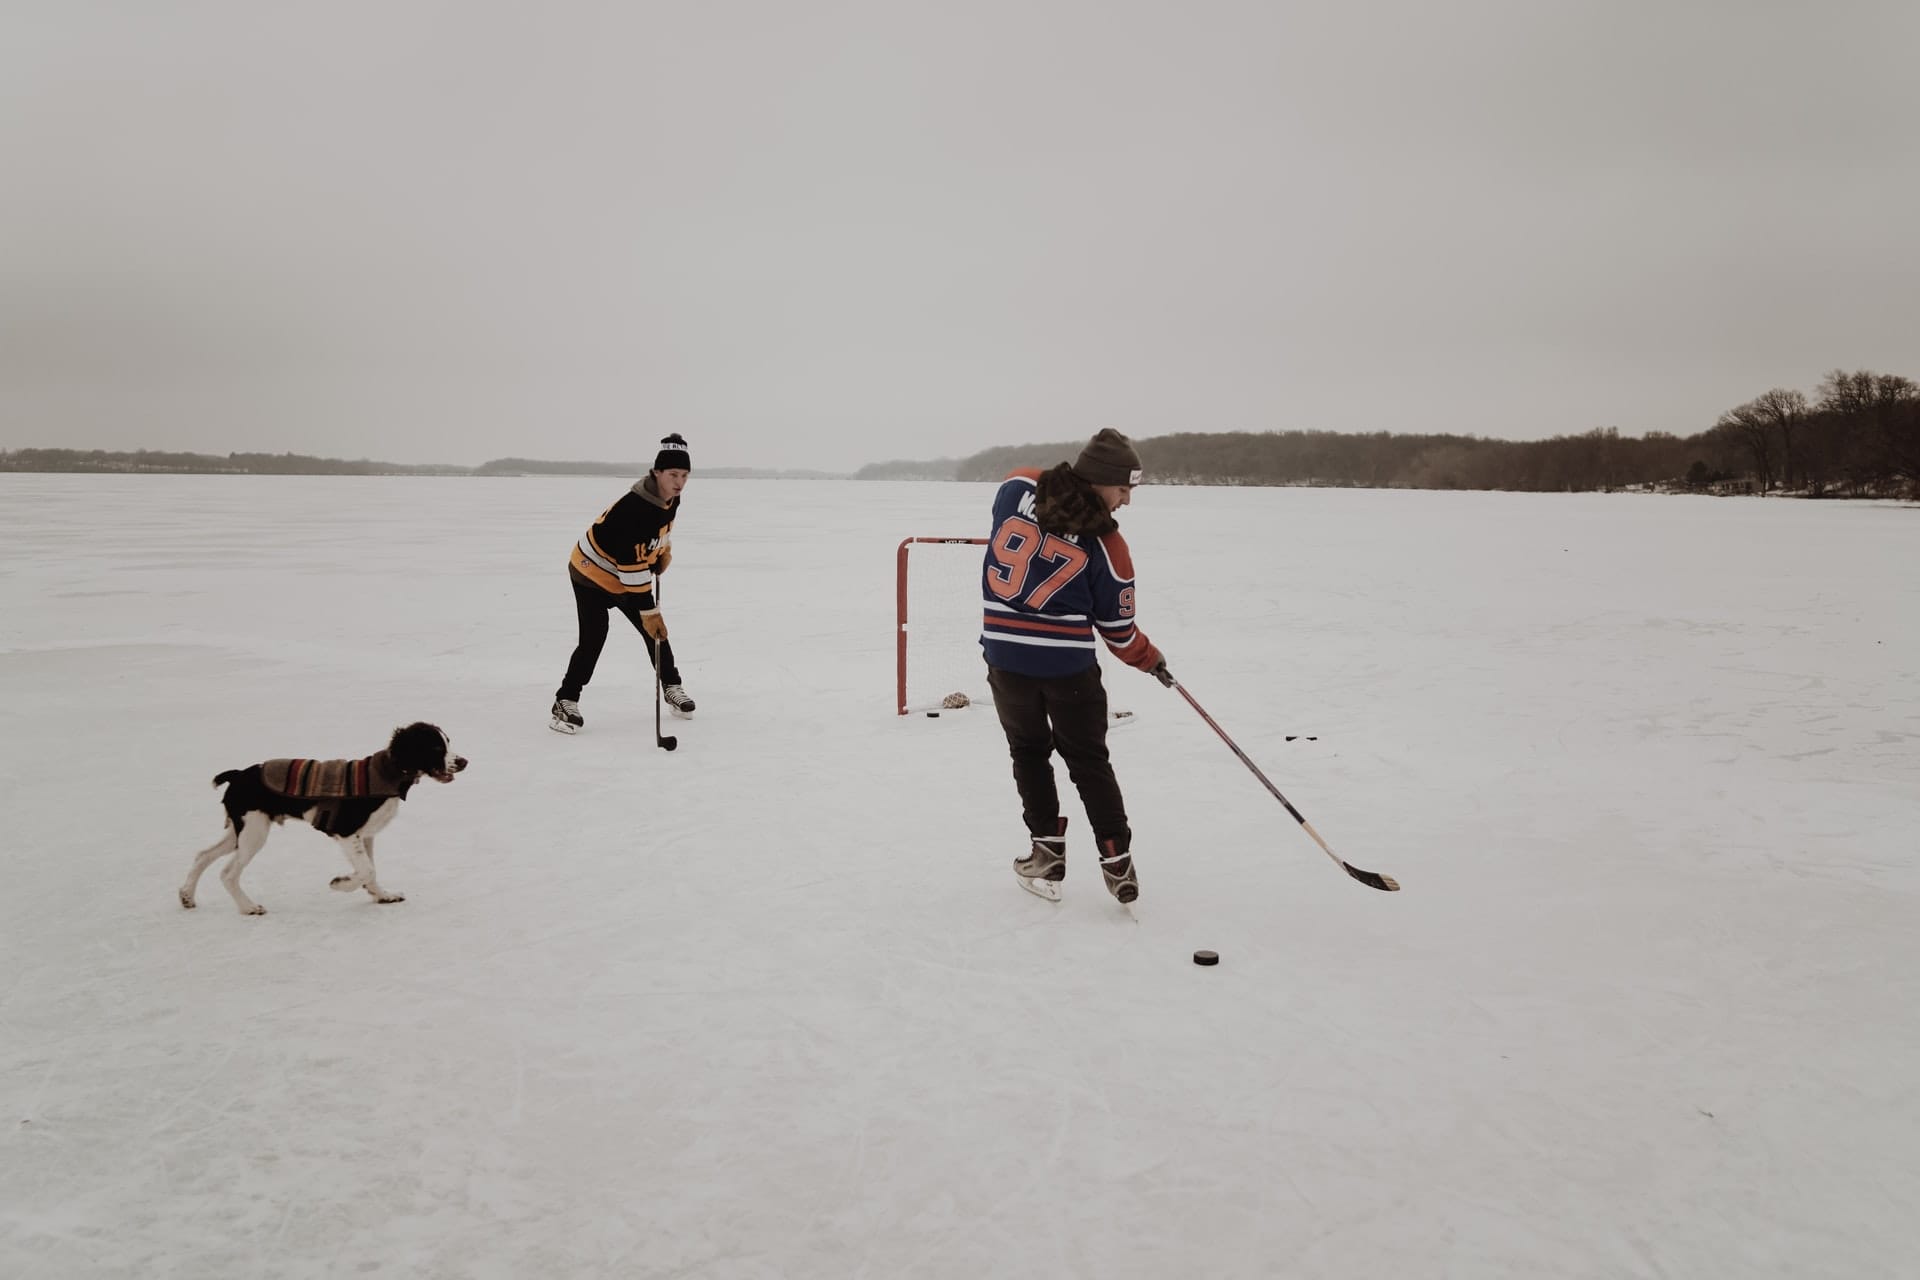 Two people playing hockey on a lake, with dog standing beside them.